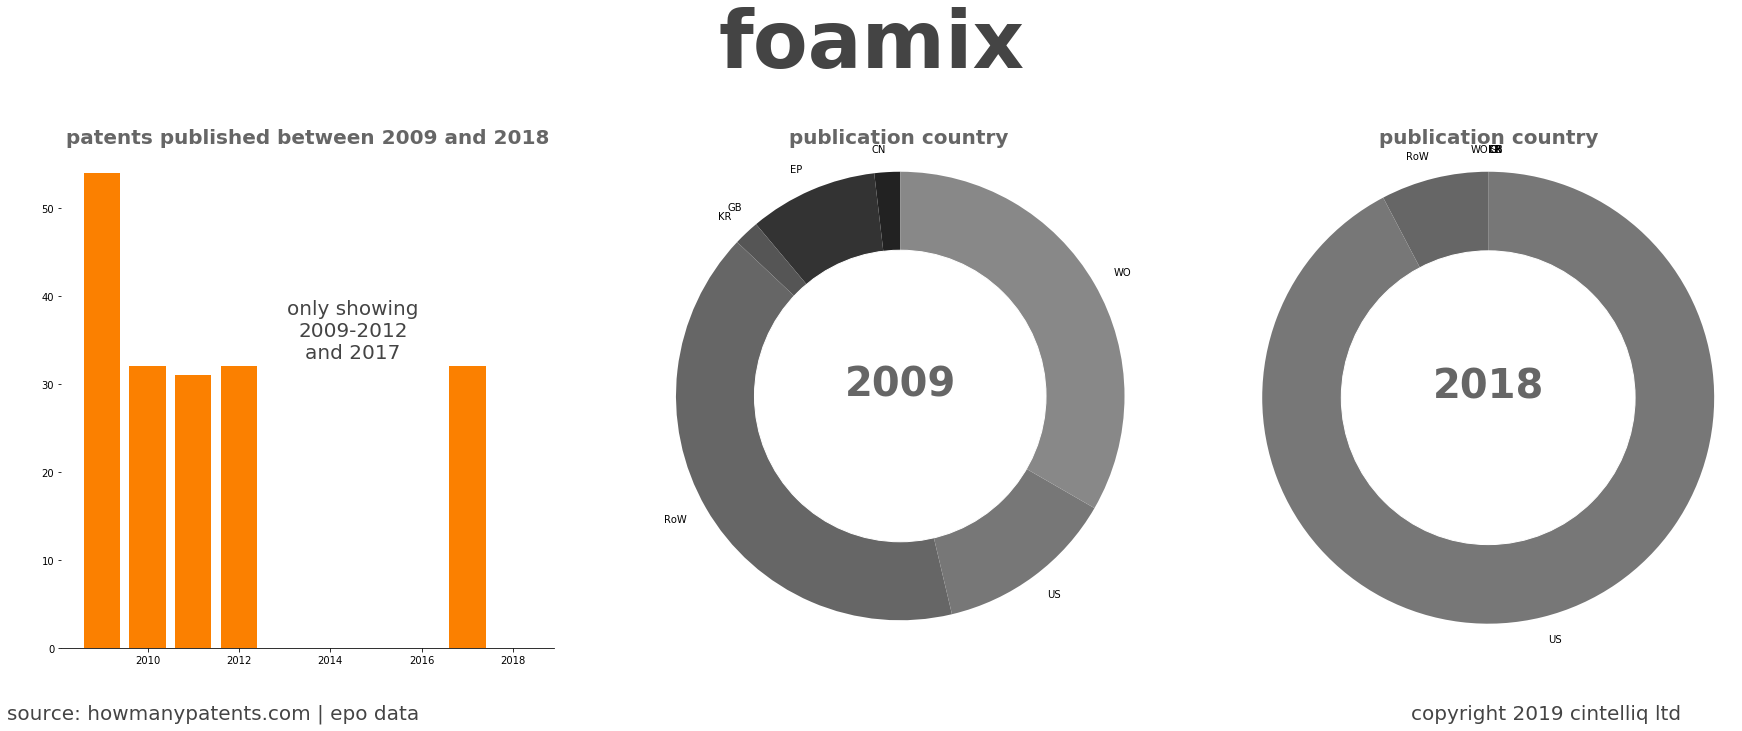 summary of patents for Foamix